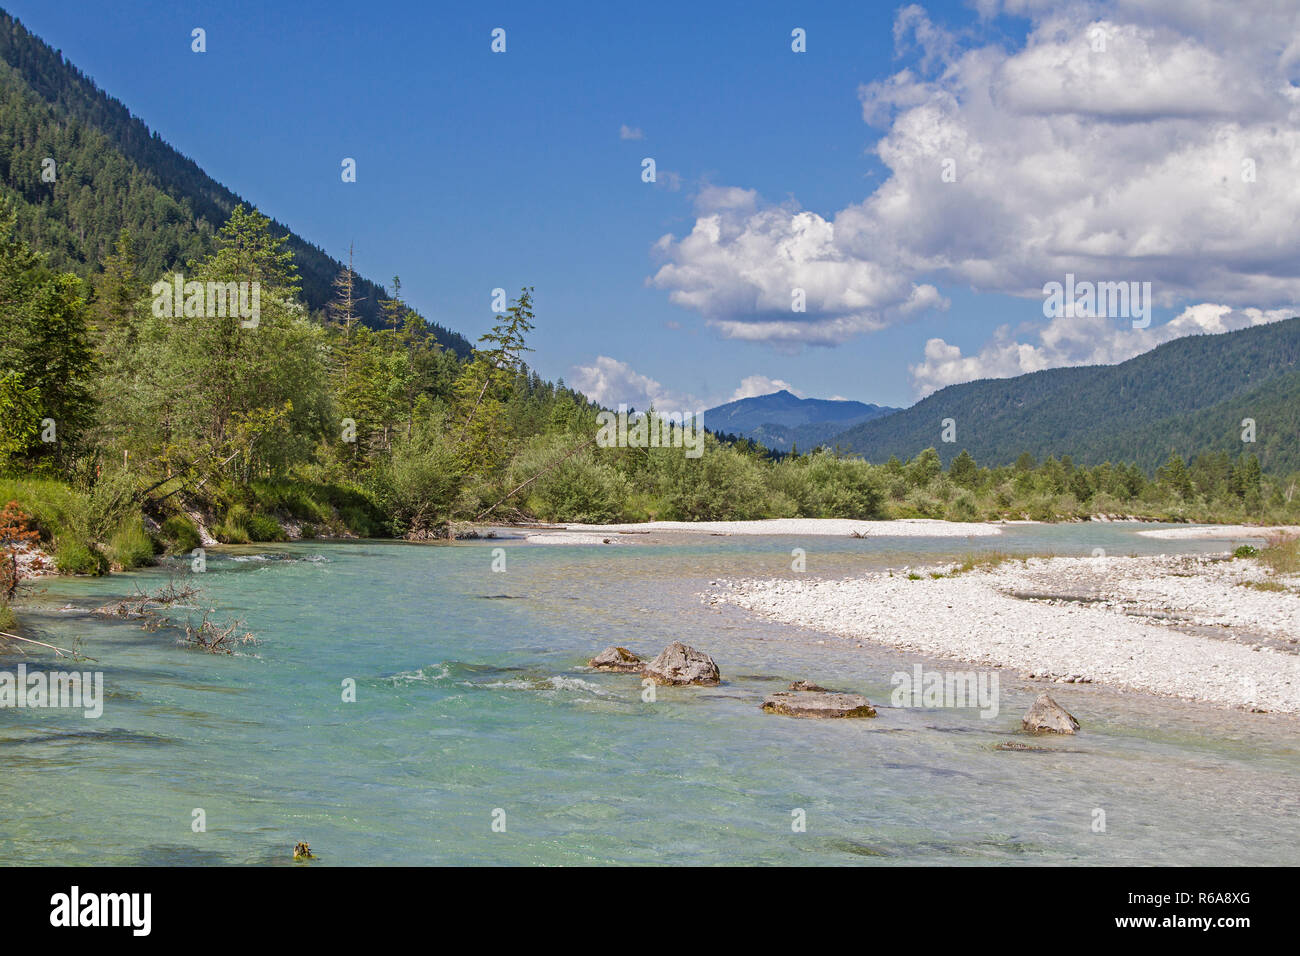 The Untamed River Course Of The Isar In Vorderriss In Upper Bavaria Stock Photo